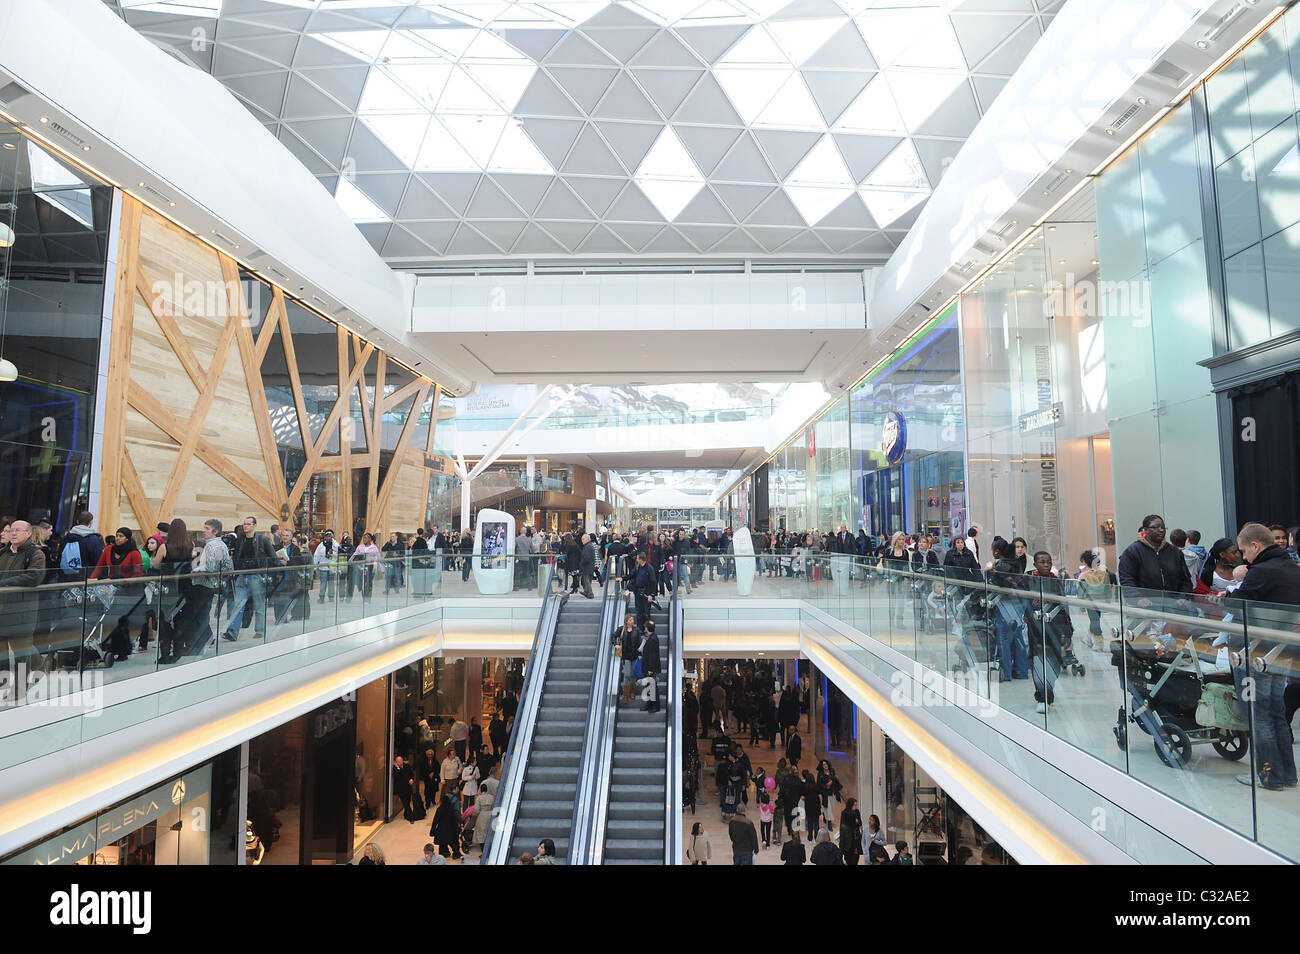 Westfield Shopping Centre, the largest urban shopping mall in Europe, opens  in Shepherd's Bush London, England - 30.10.08 Stock Photo - Alamy